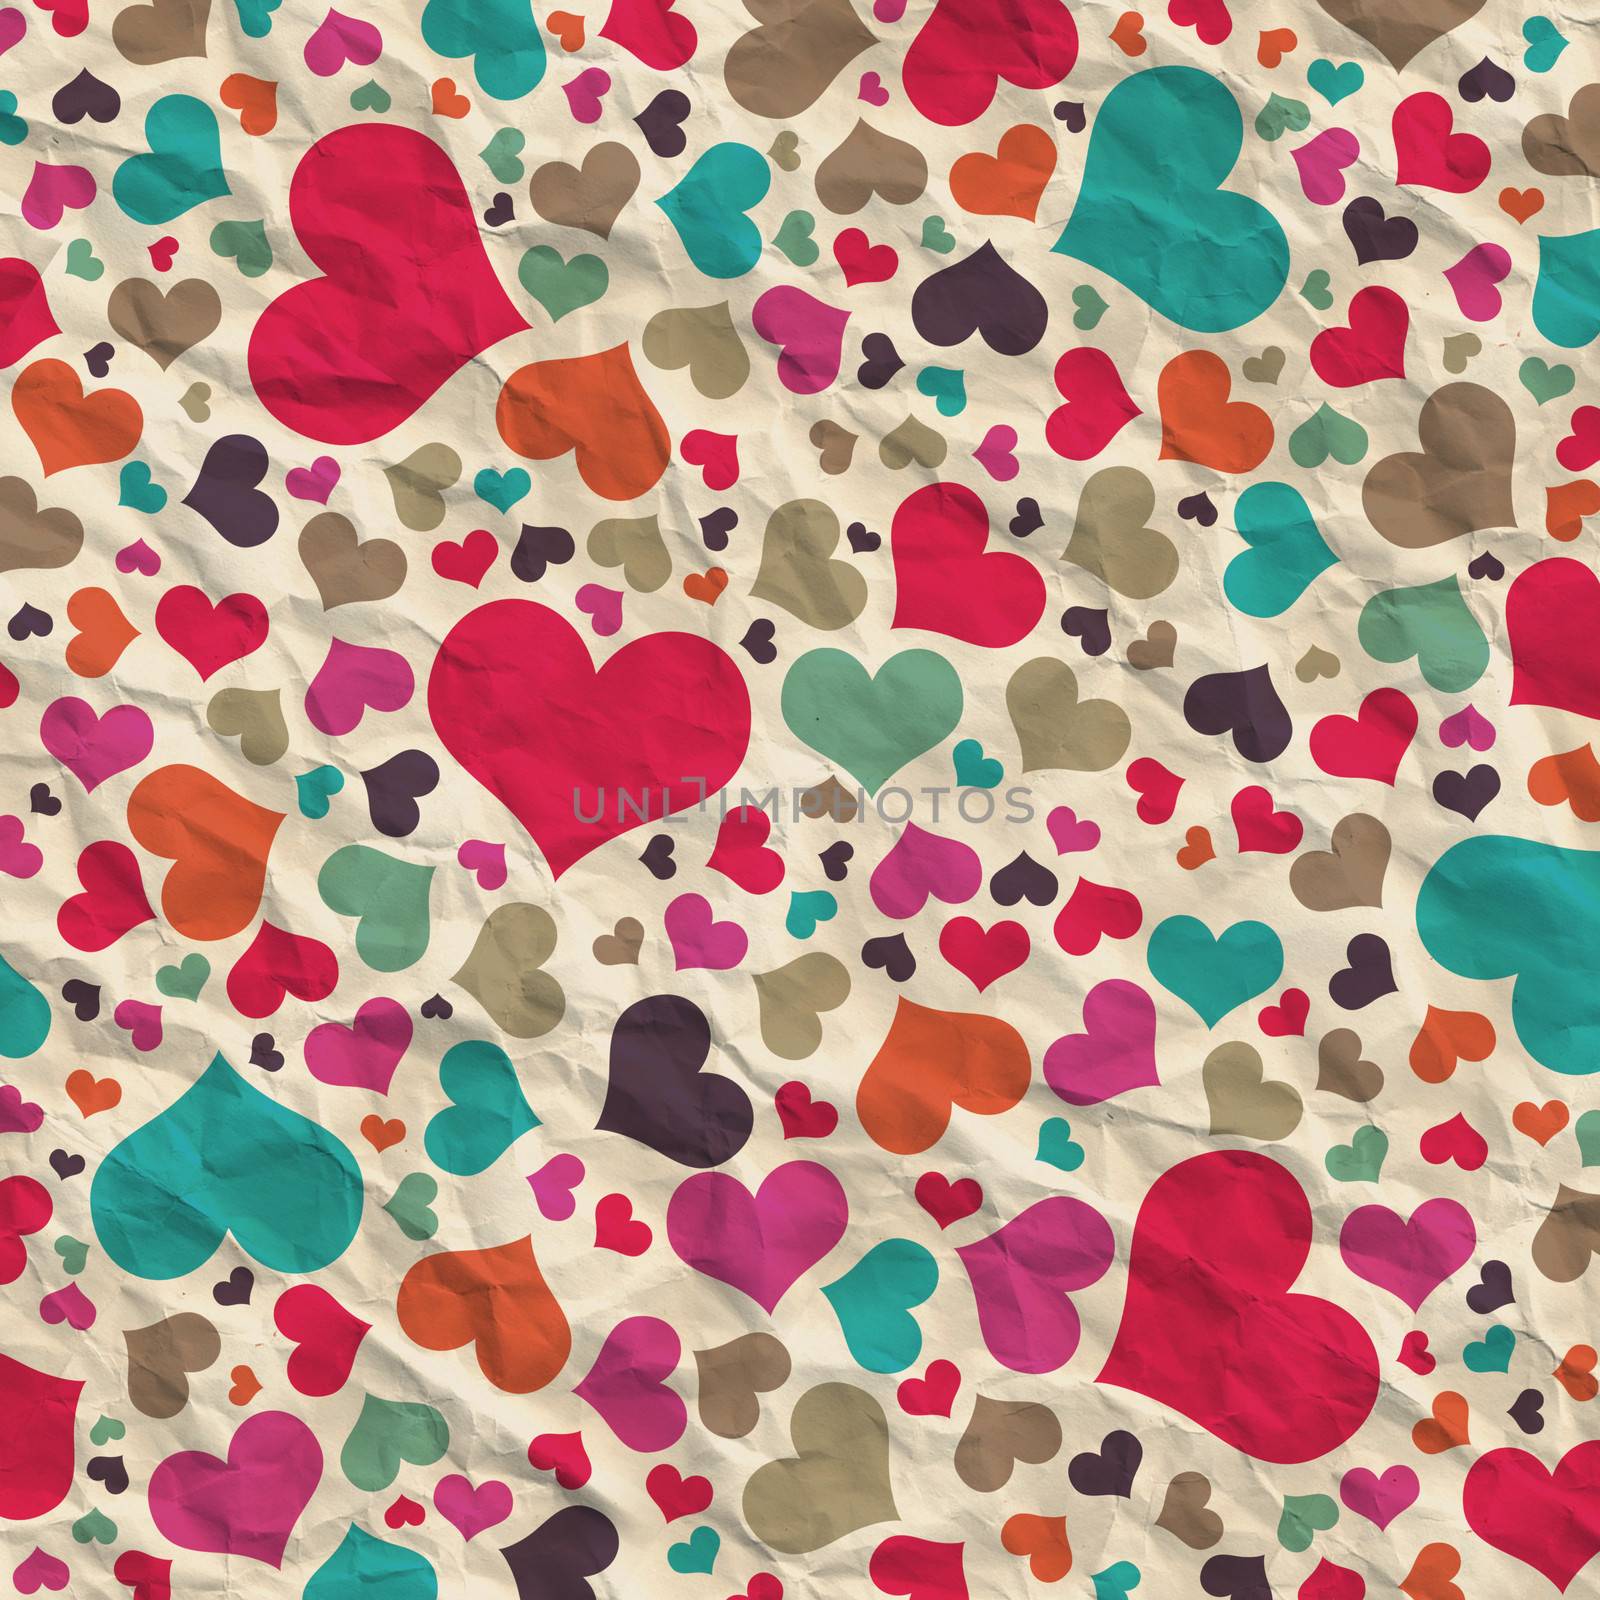 Abstract background of hearts. The concept of Valentine's Day